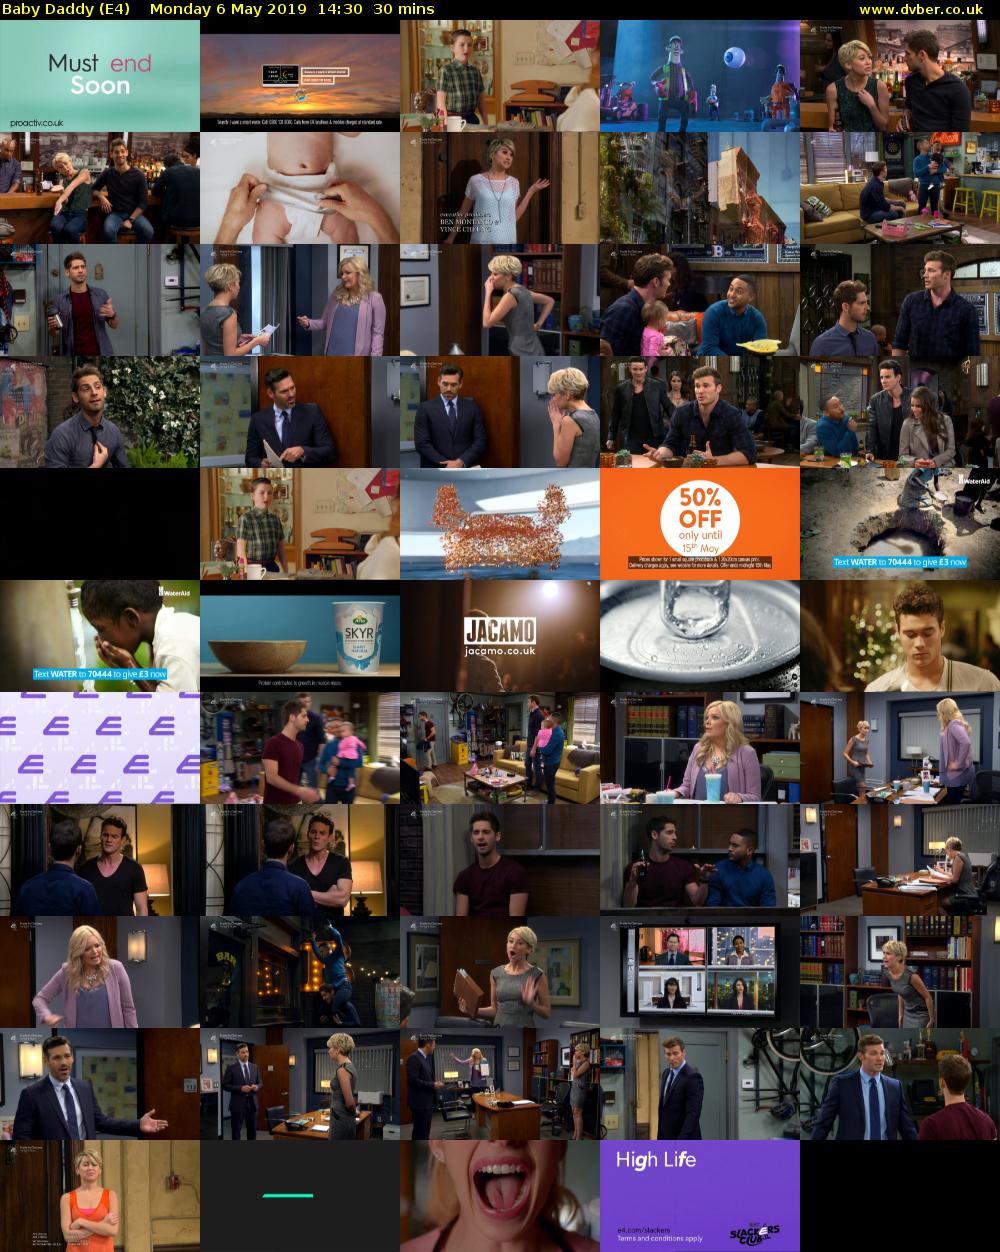 Baby Daddy (E4) Monday 6 May 2019 14:30 - 15:00